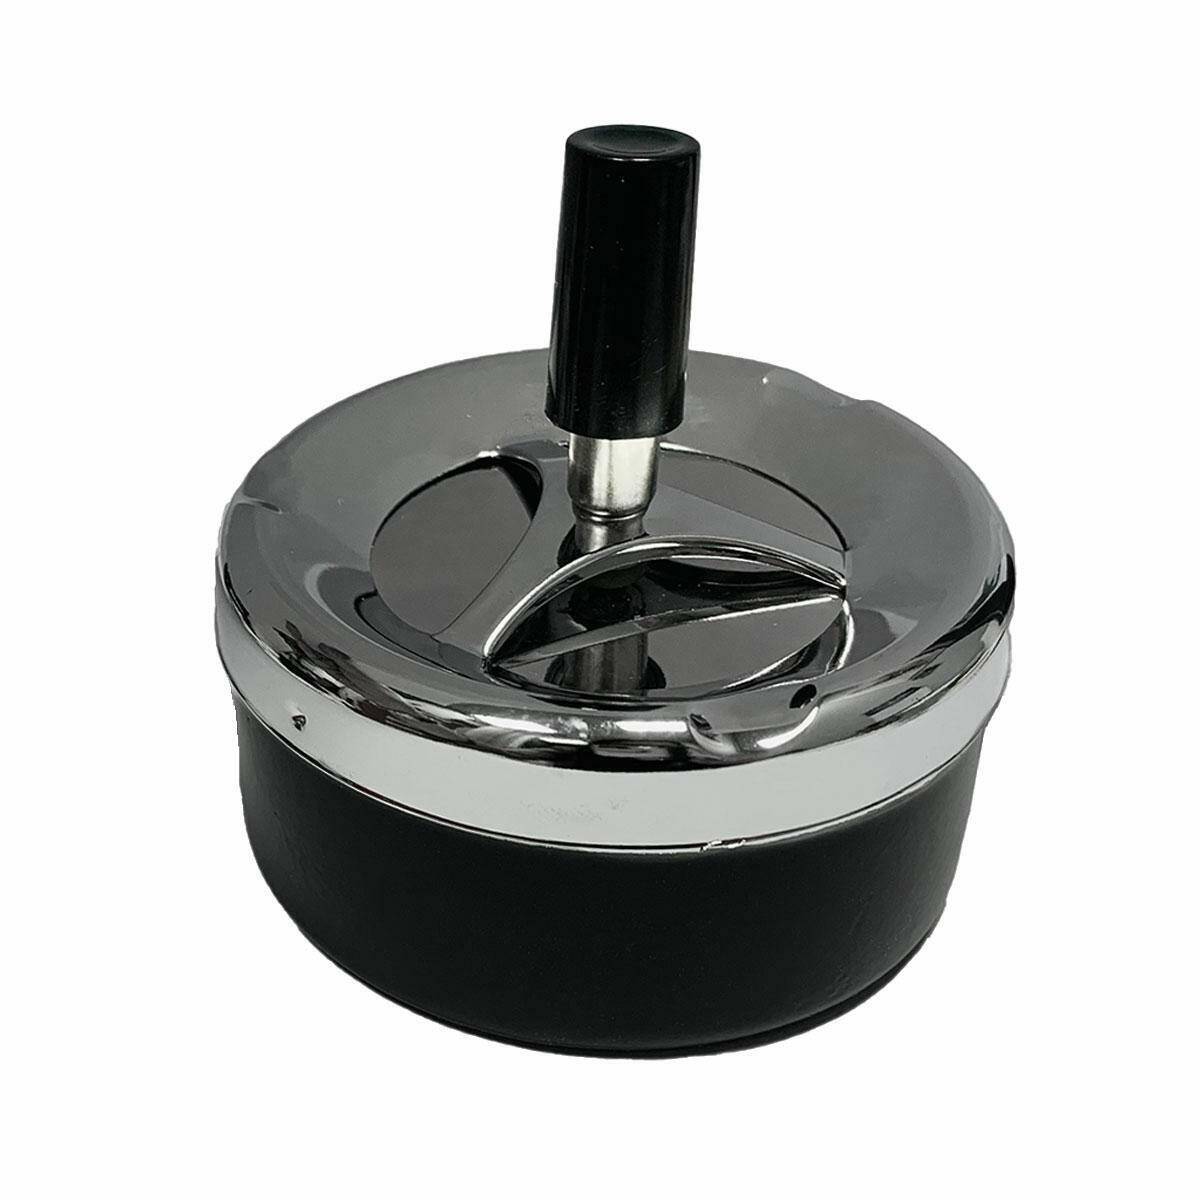 Ashtray with a latch - black (9cm)